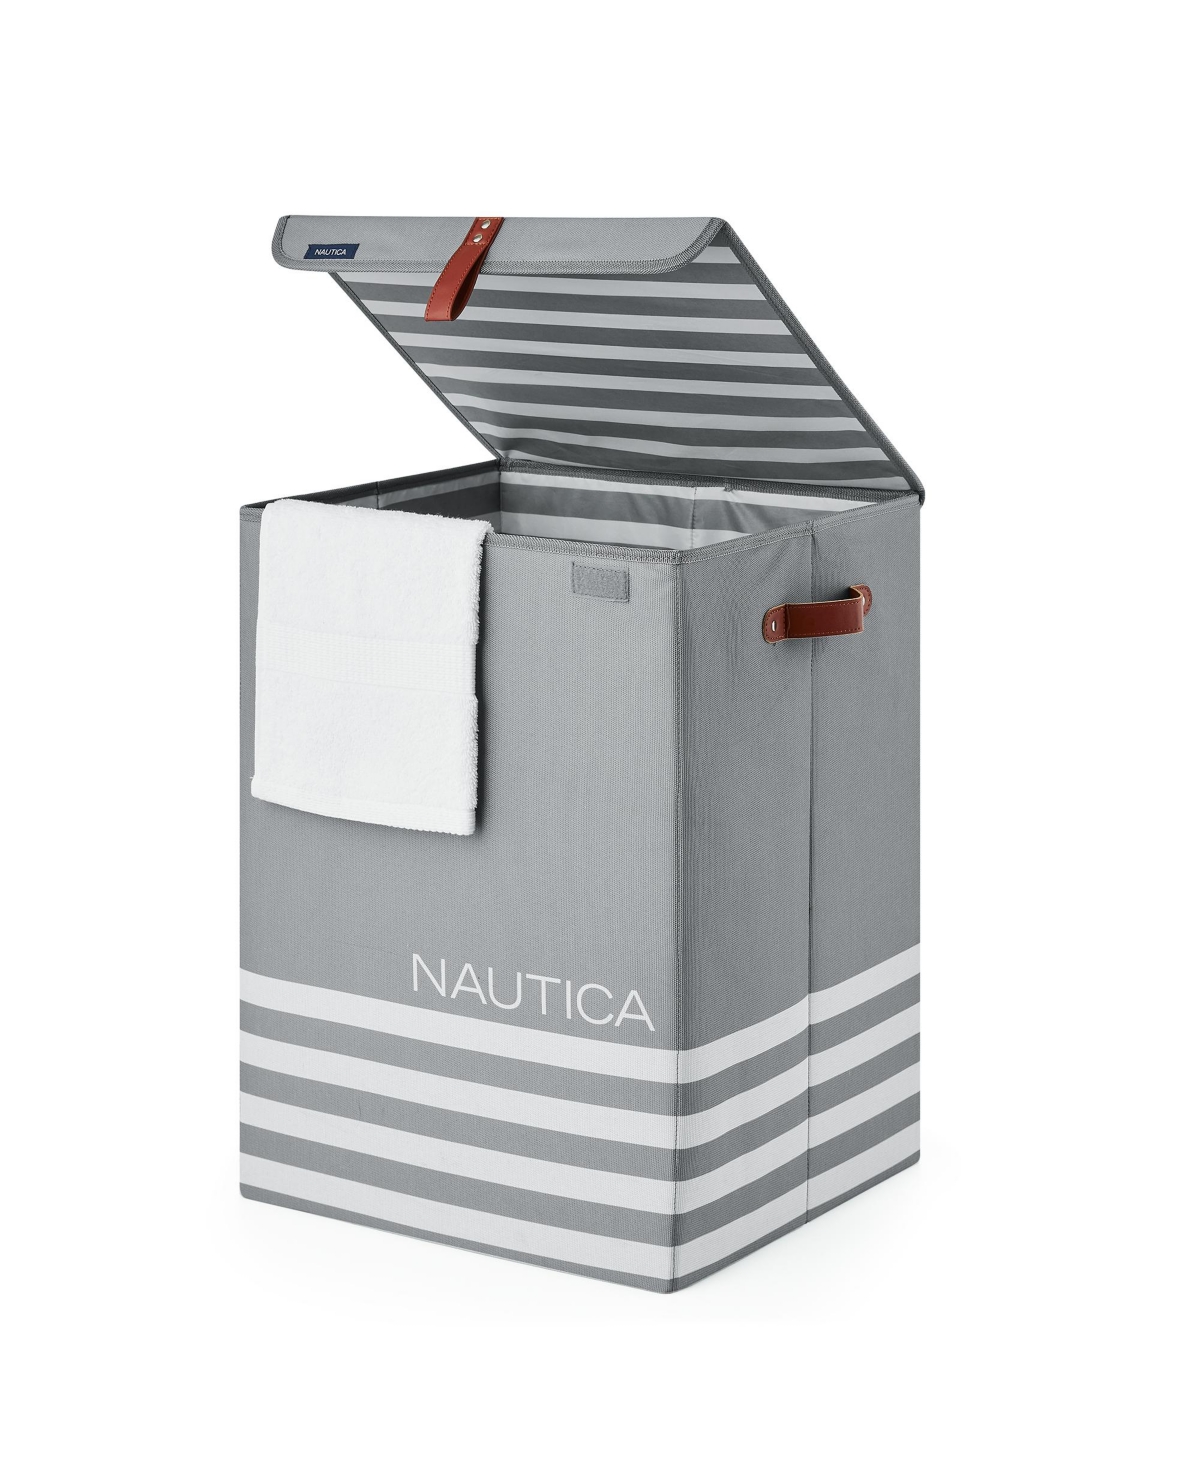 Nautica Folded Large Storage Trunk With Lid Block In Gray Stripe